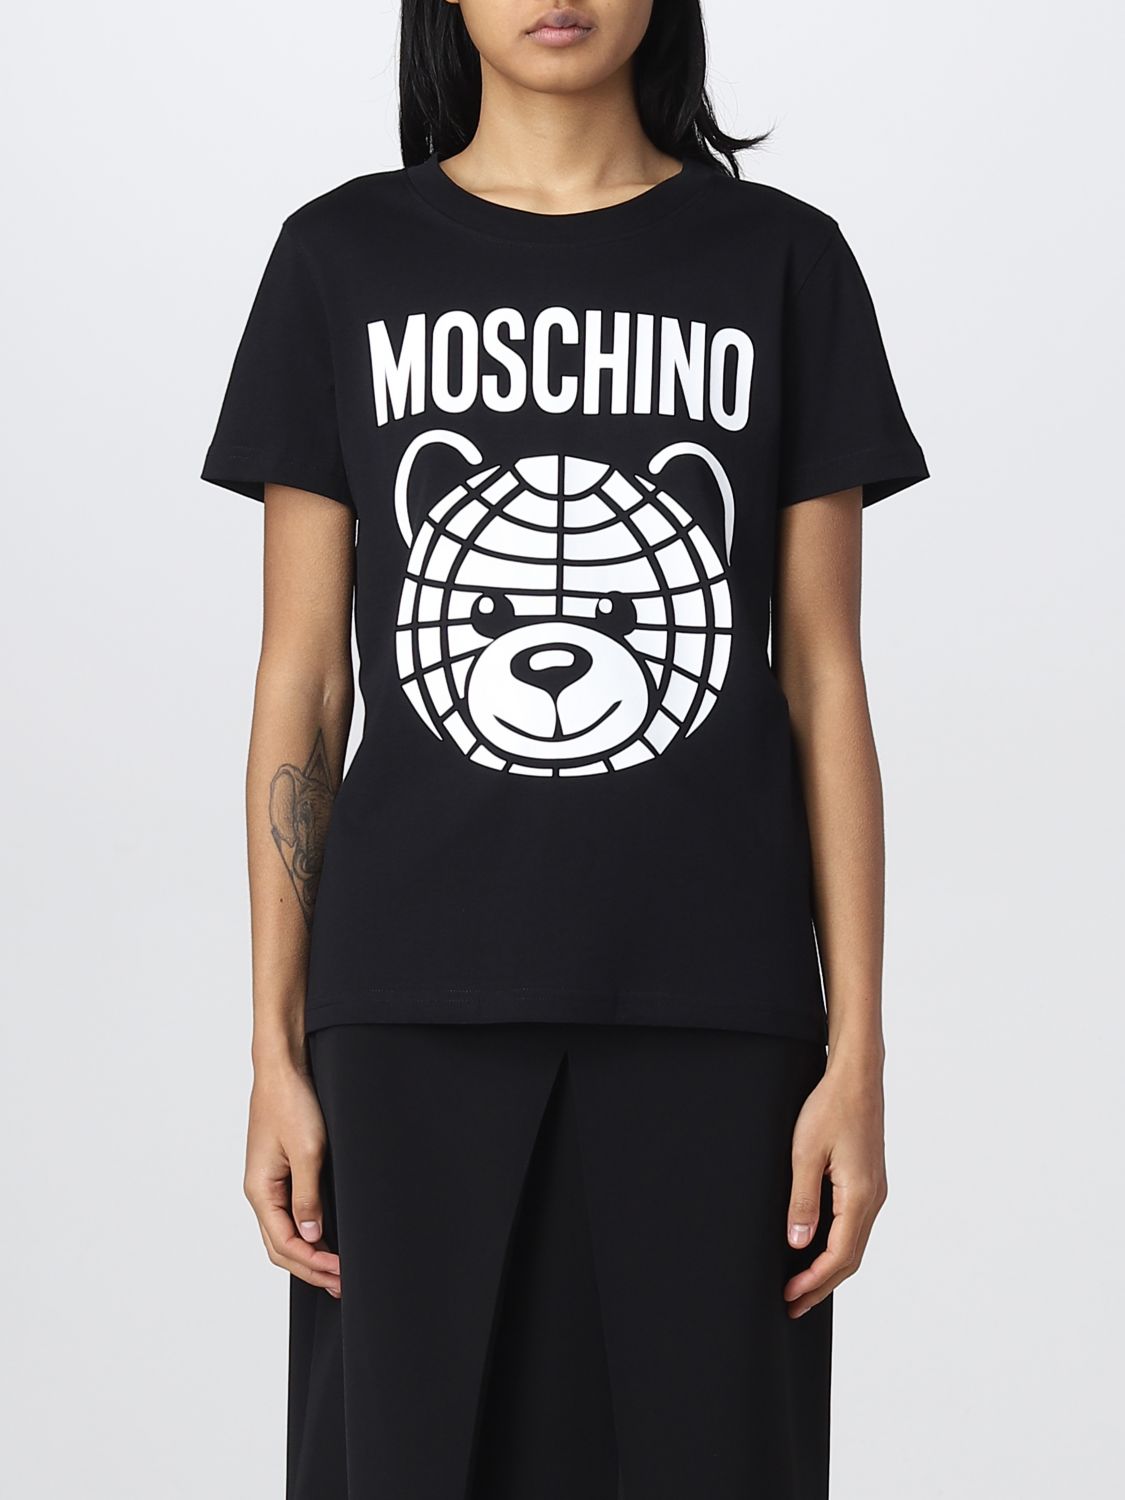 Moschino Couture T-shirt  Woman In Black